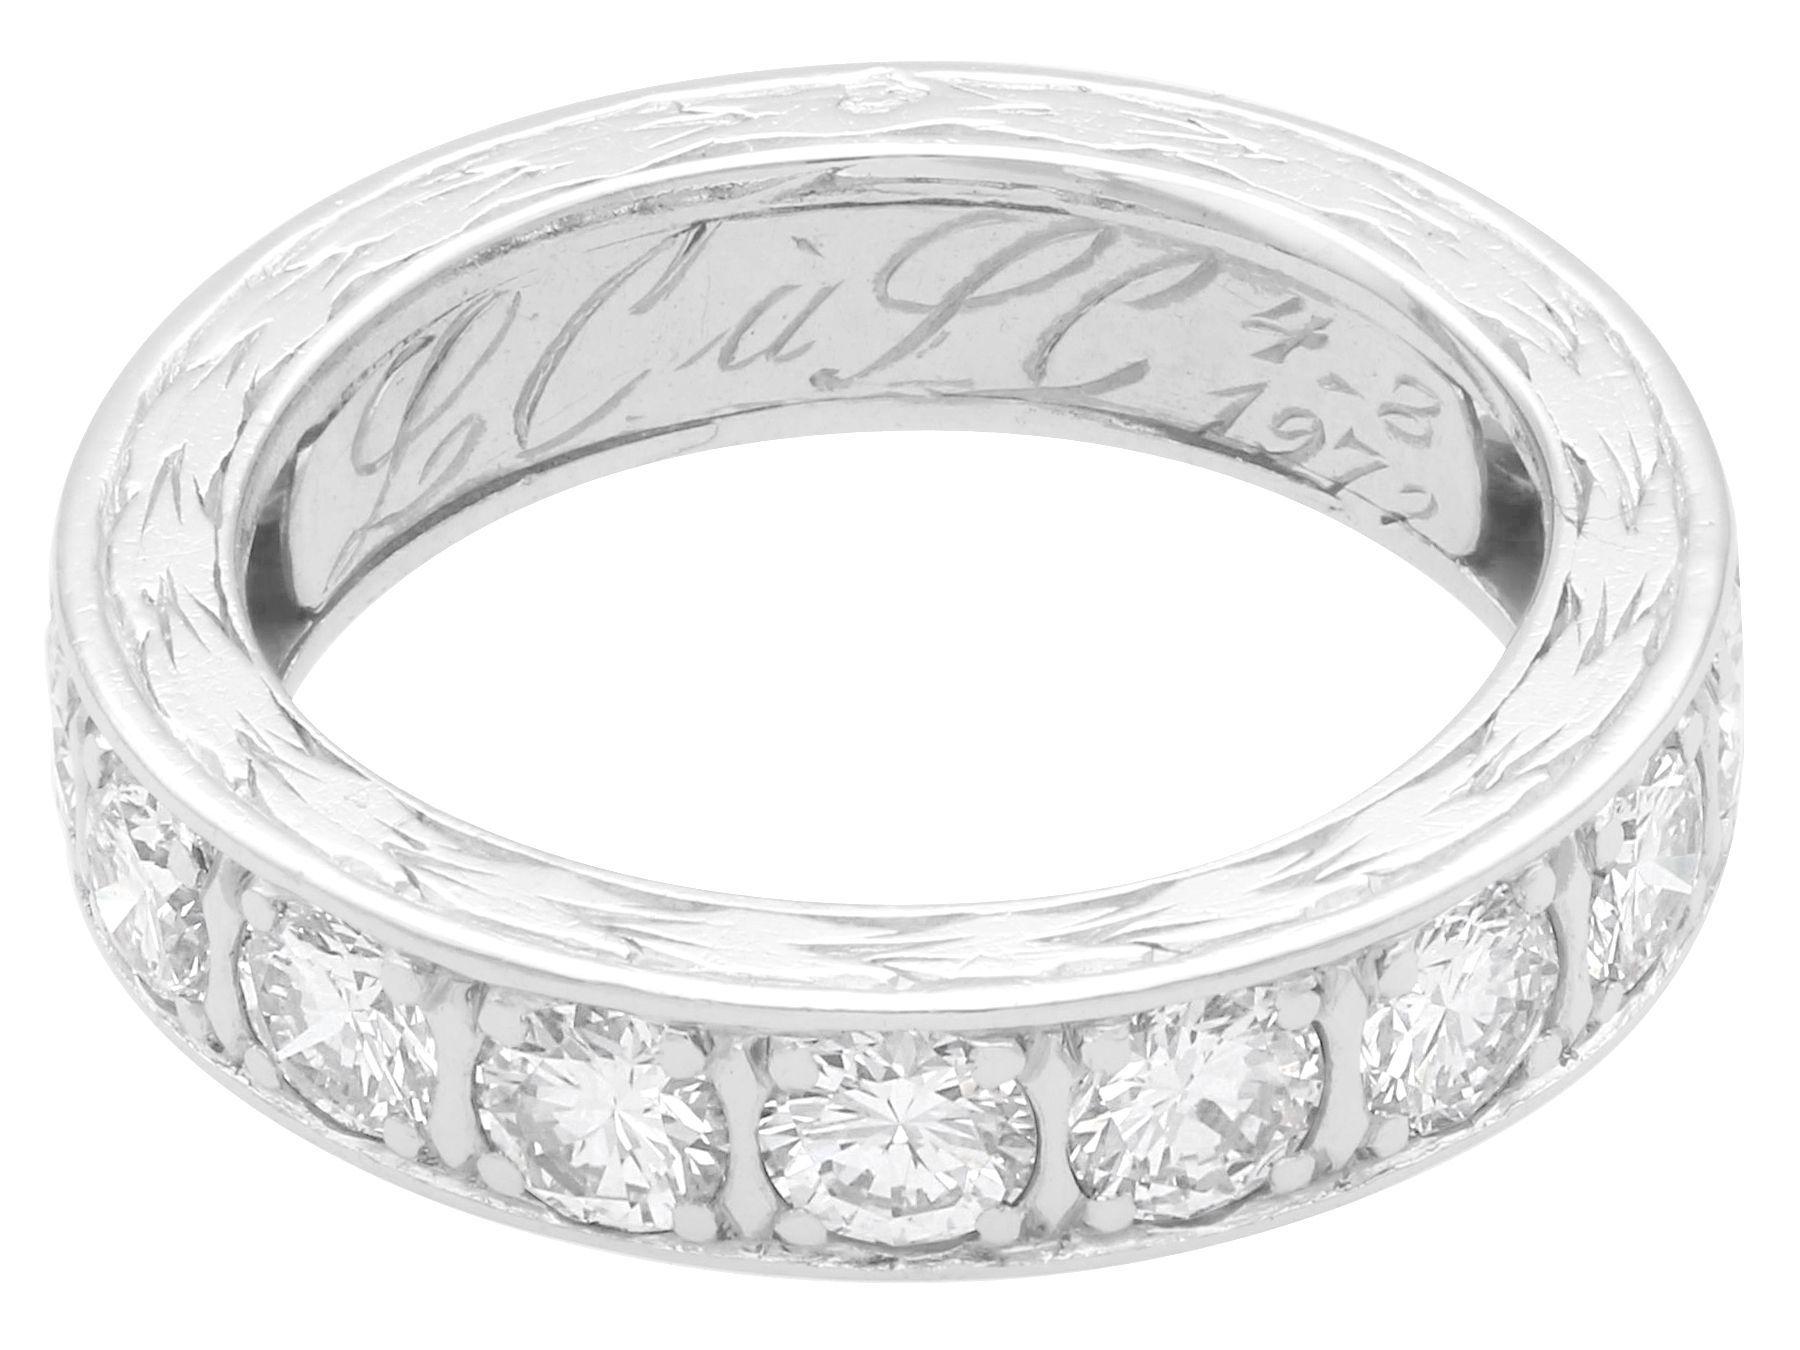 A fine, and impressive 2.89 carat diamond and platinum full eternity ring; part of our diverse vintage jewelry and estate jewelry collections.

This stunning, fine and impressive diamond eternity ring has been crafted in platinum.

This full